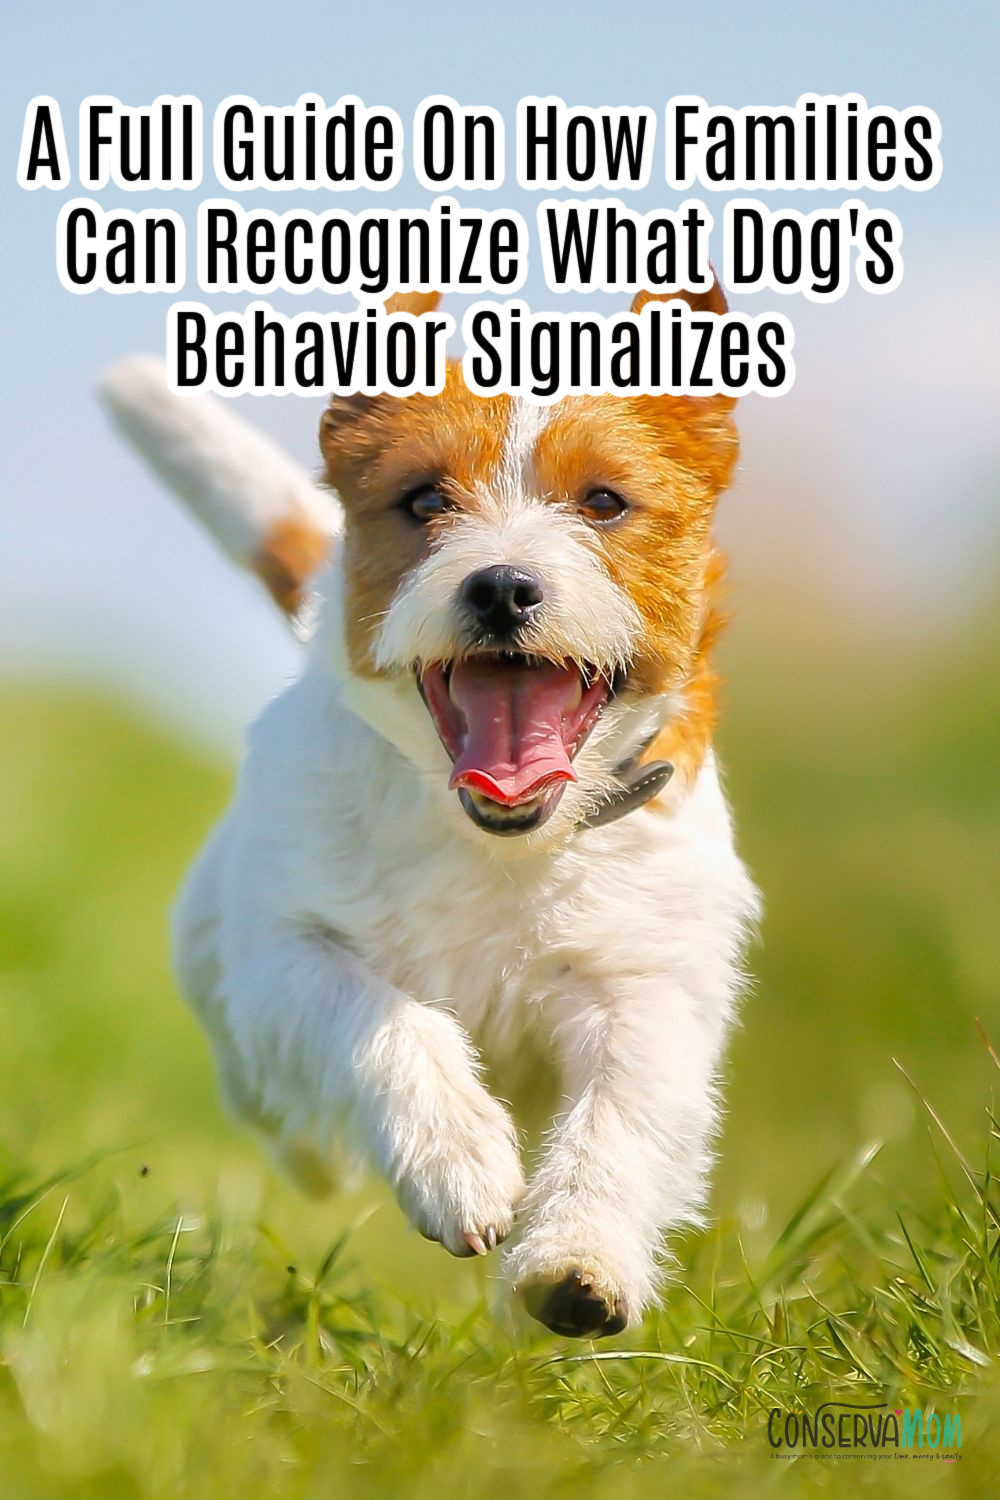 A Full Guide On How Families Can Recognize their Dog's Behavior